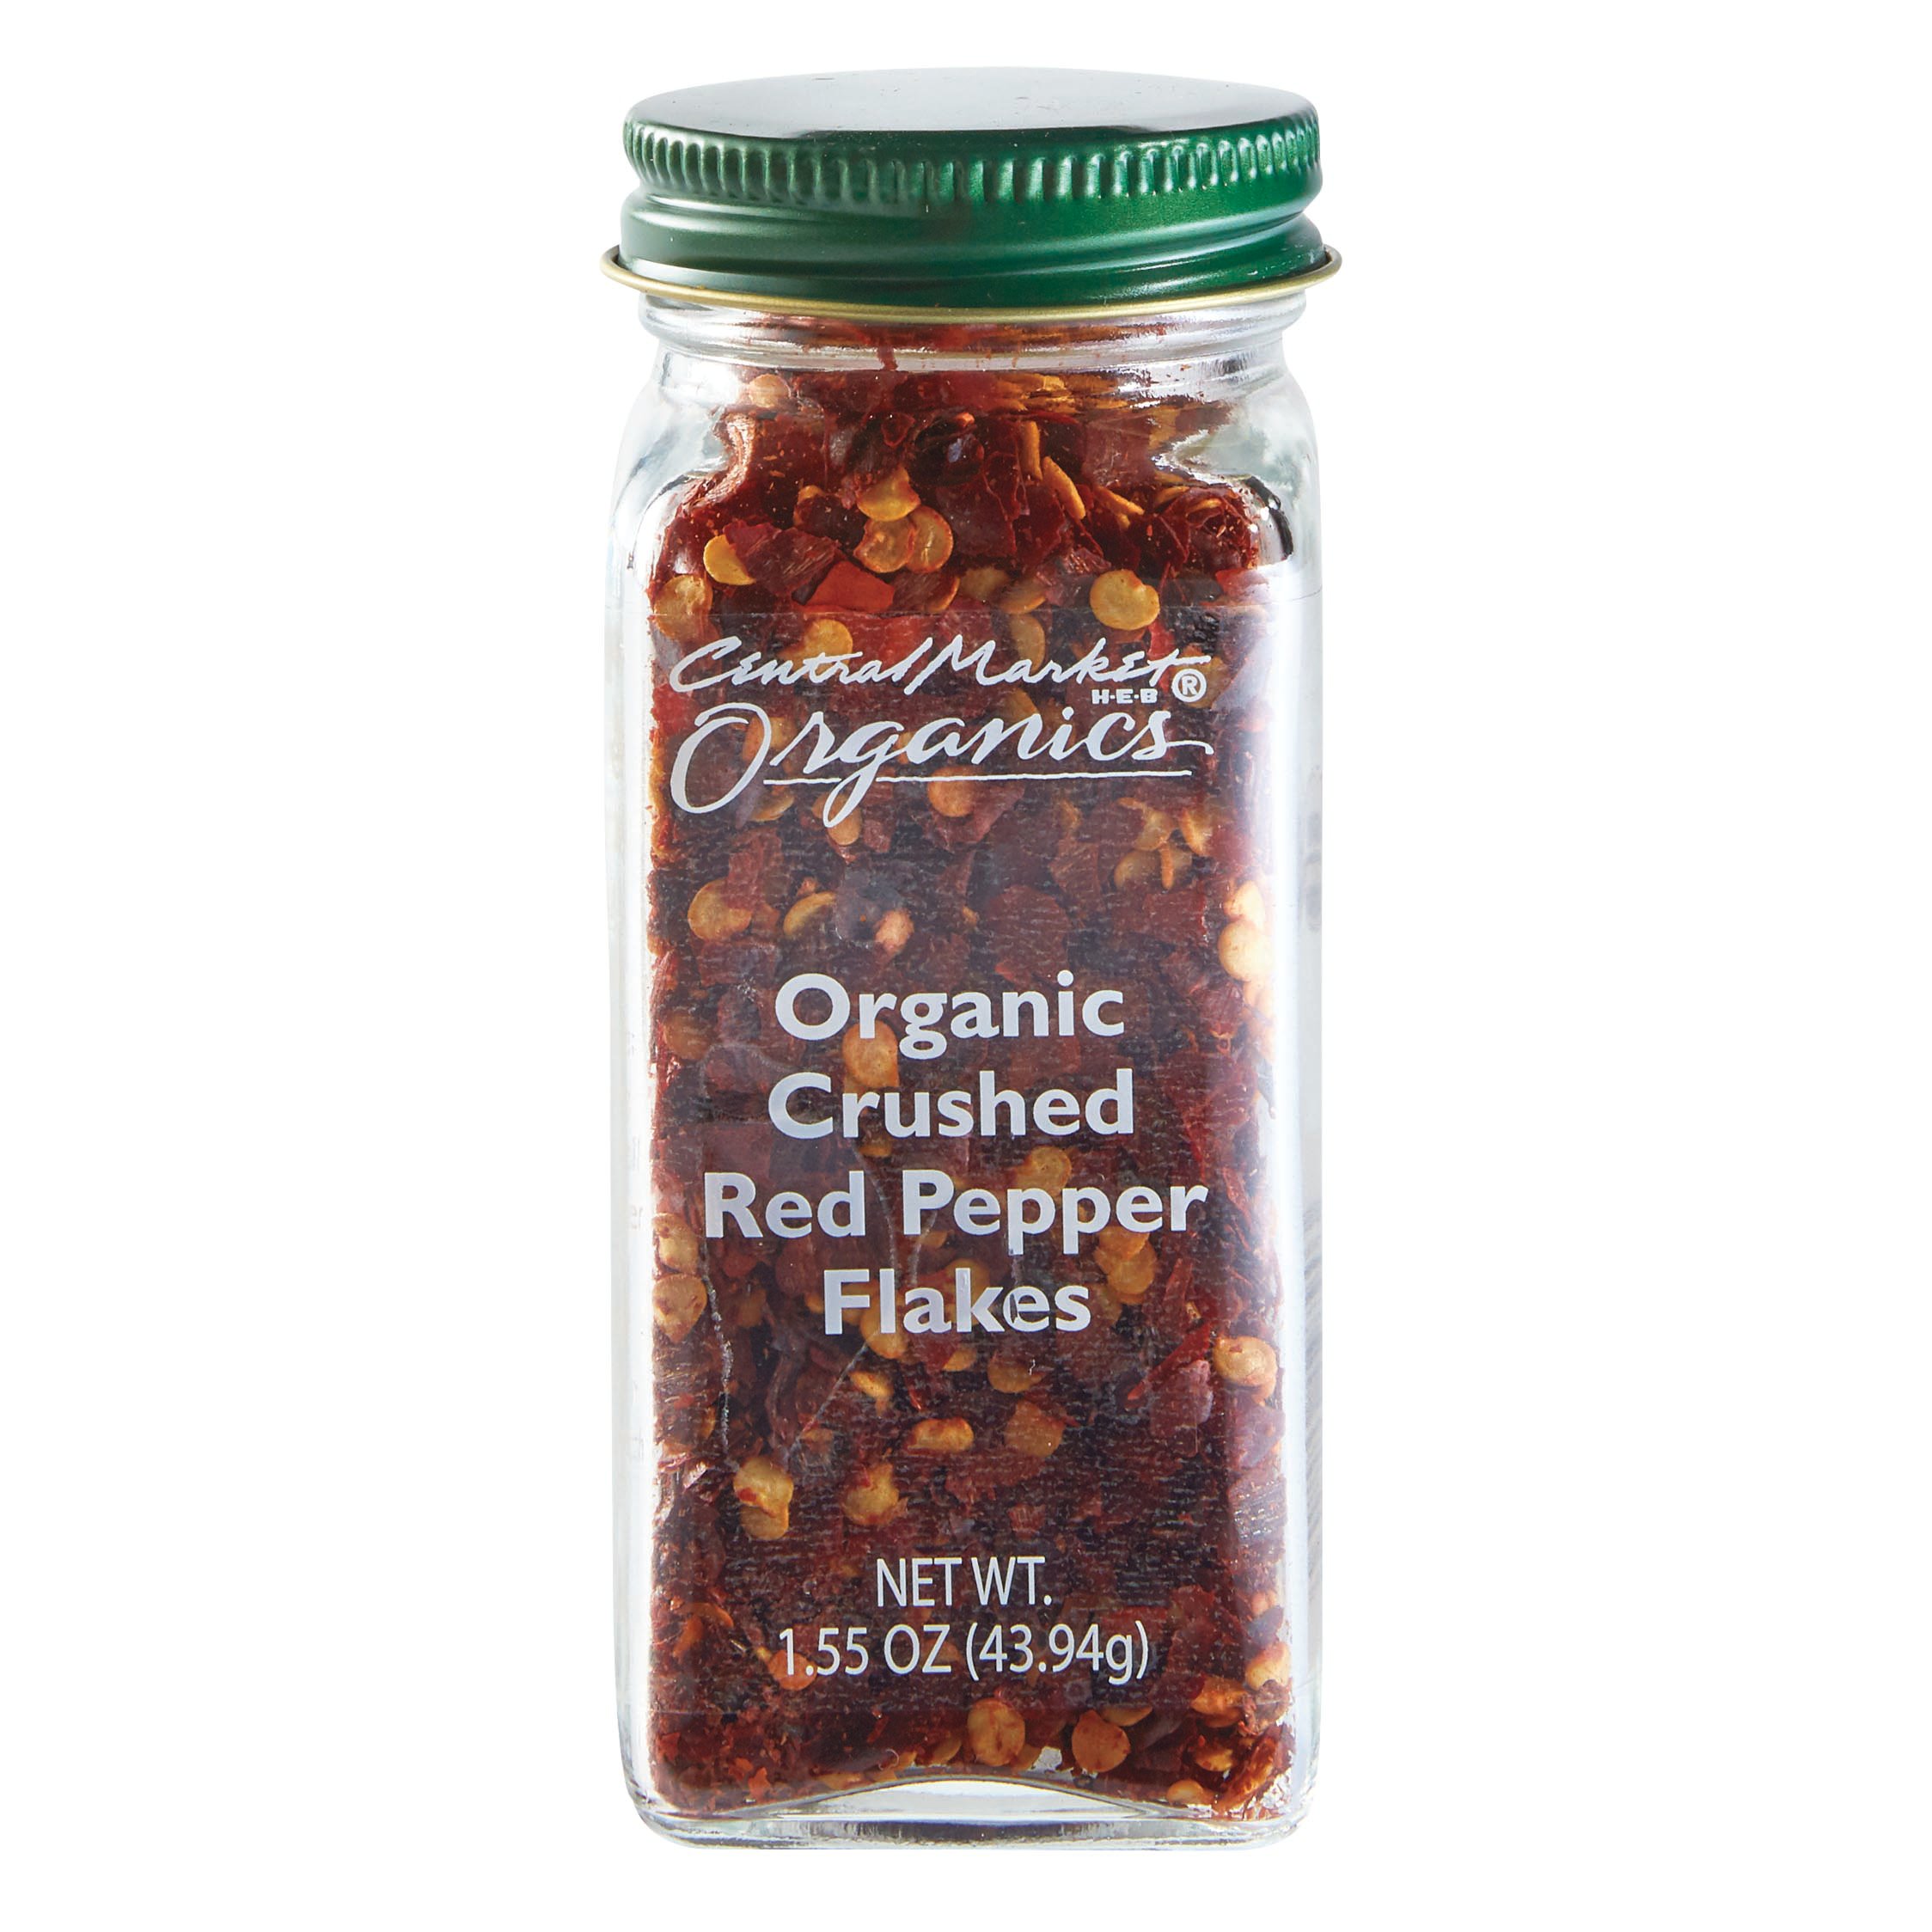 Central Market Organics Crushed Red - Shop Spices at H-E-B